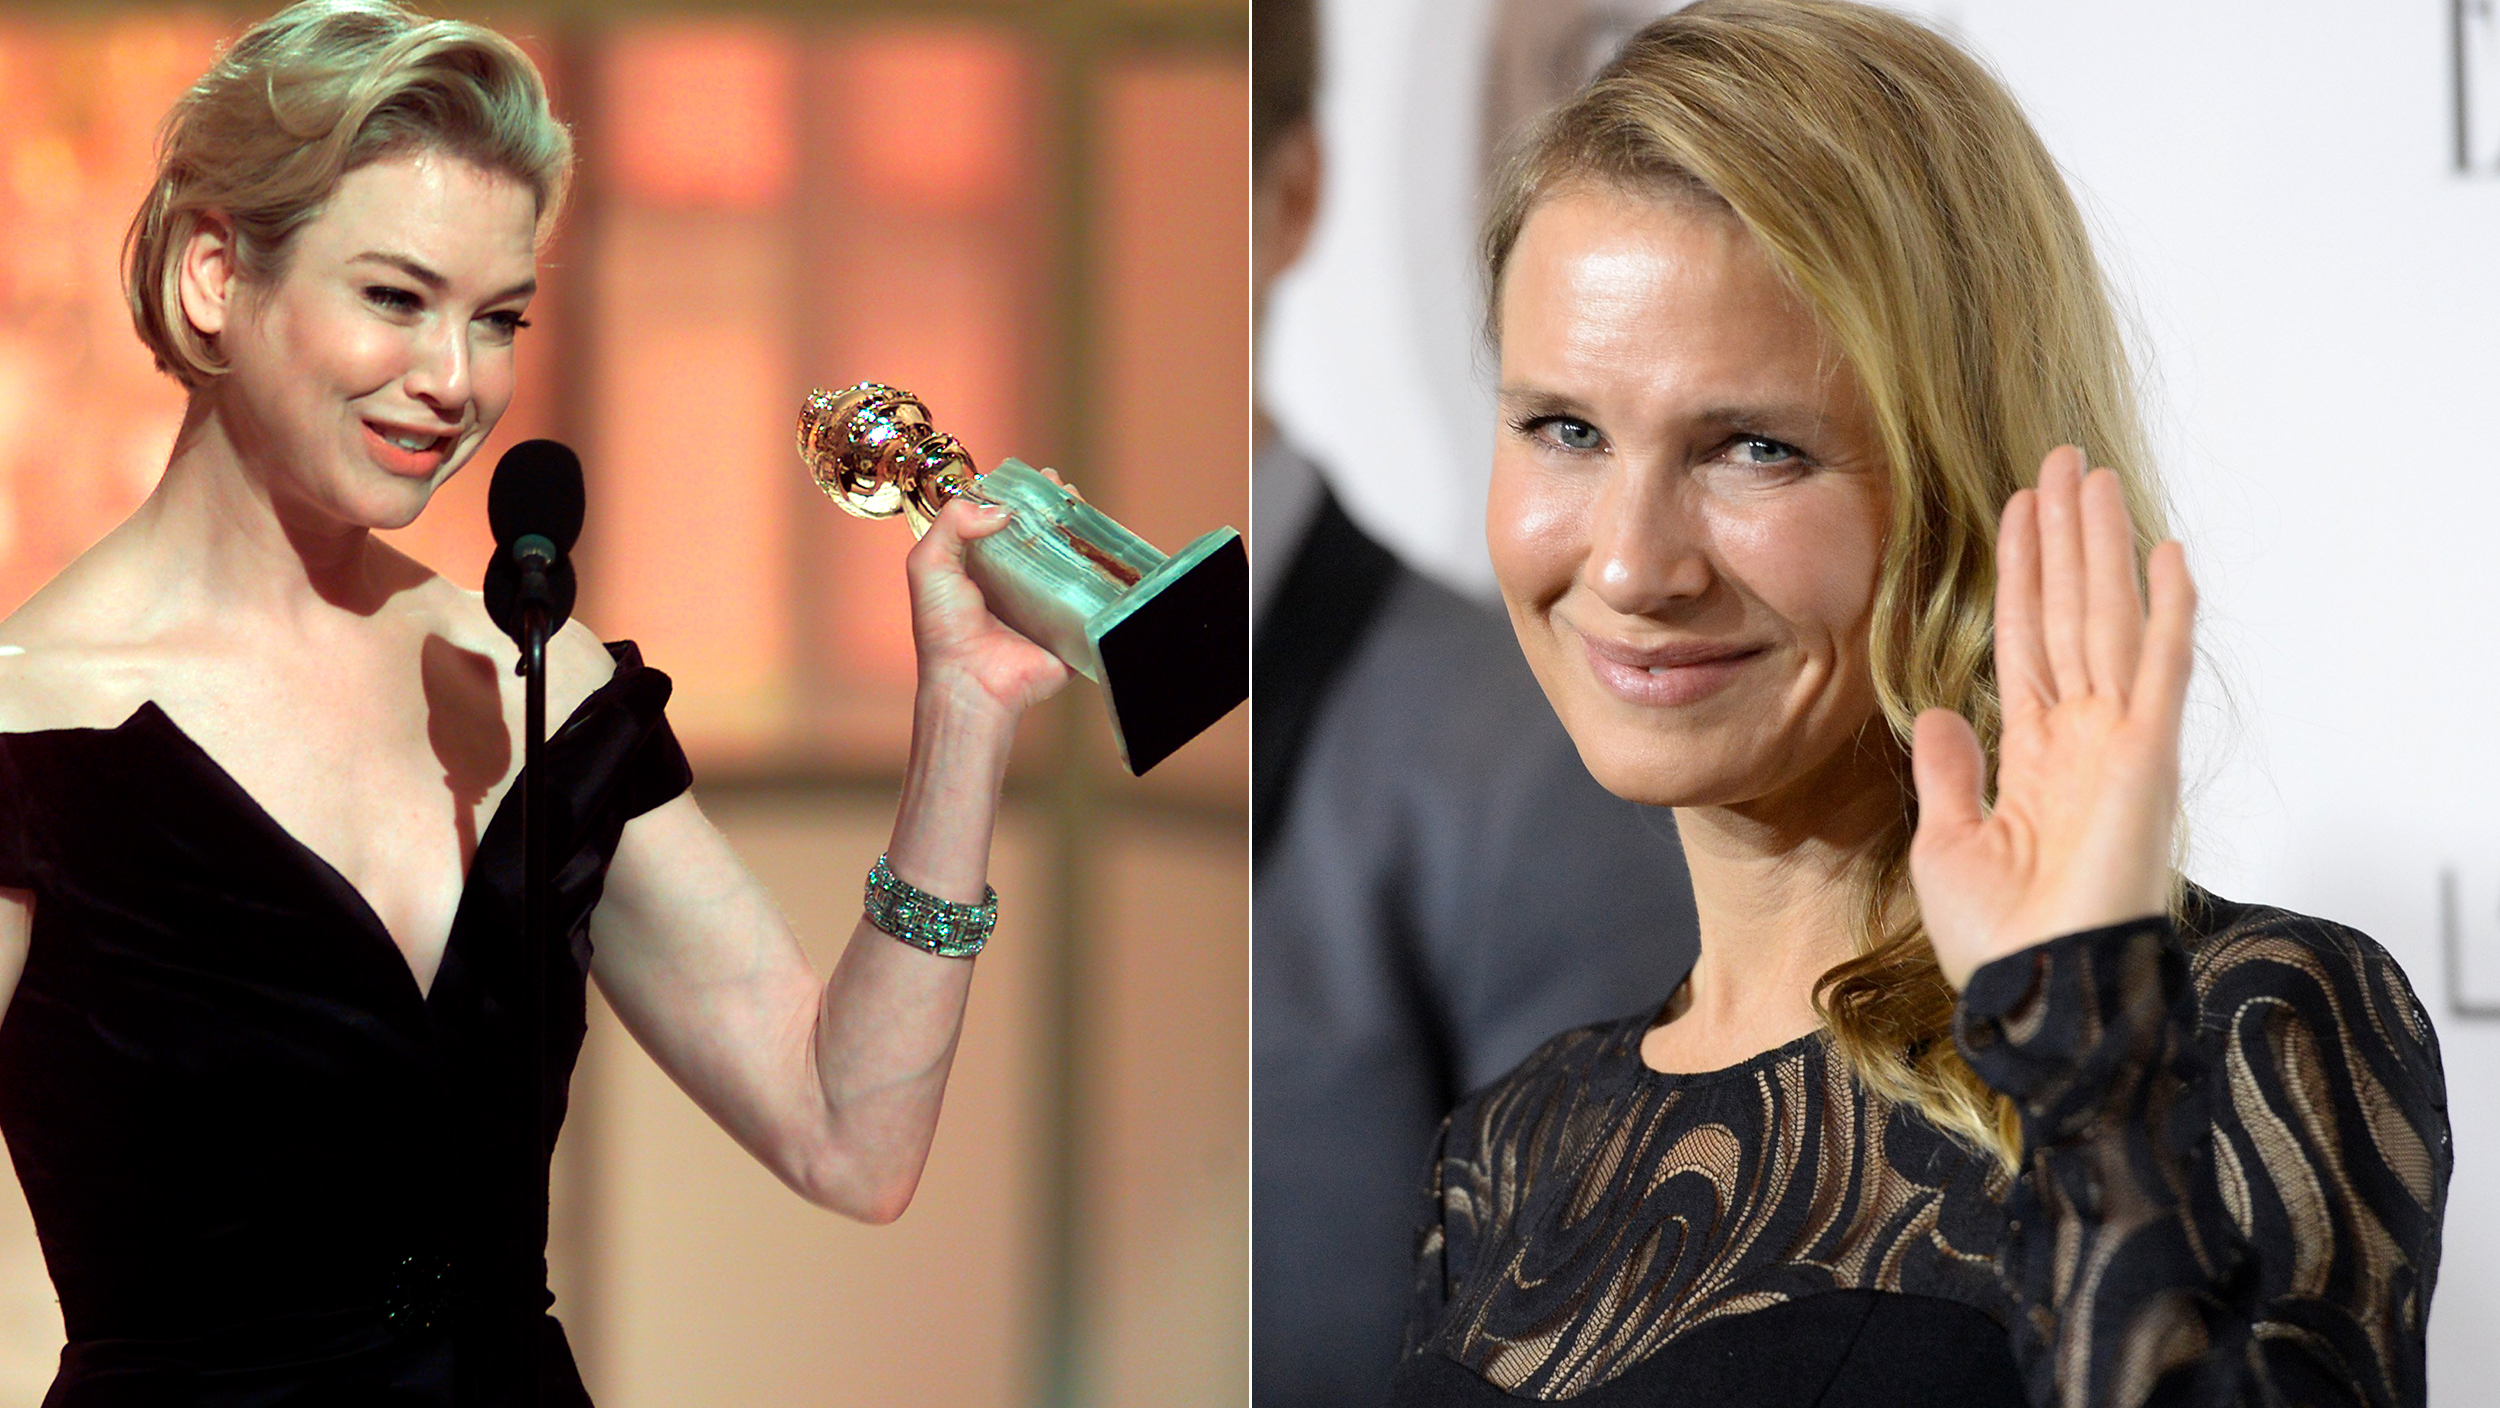 Renee Zellweger 'glad' people think she looks 'different' - TODAY.com2500 x 1408